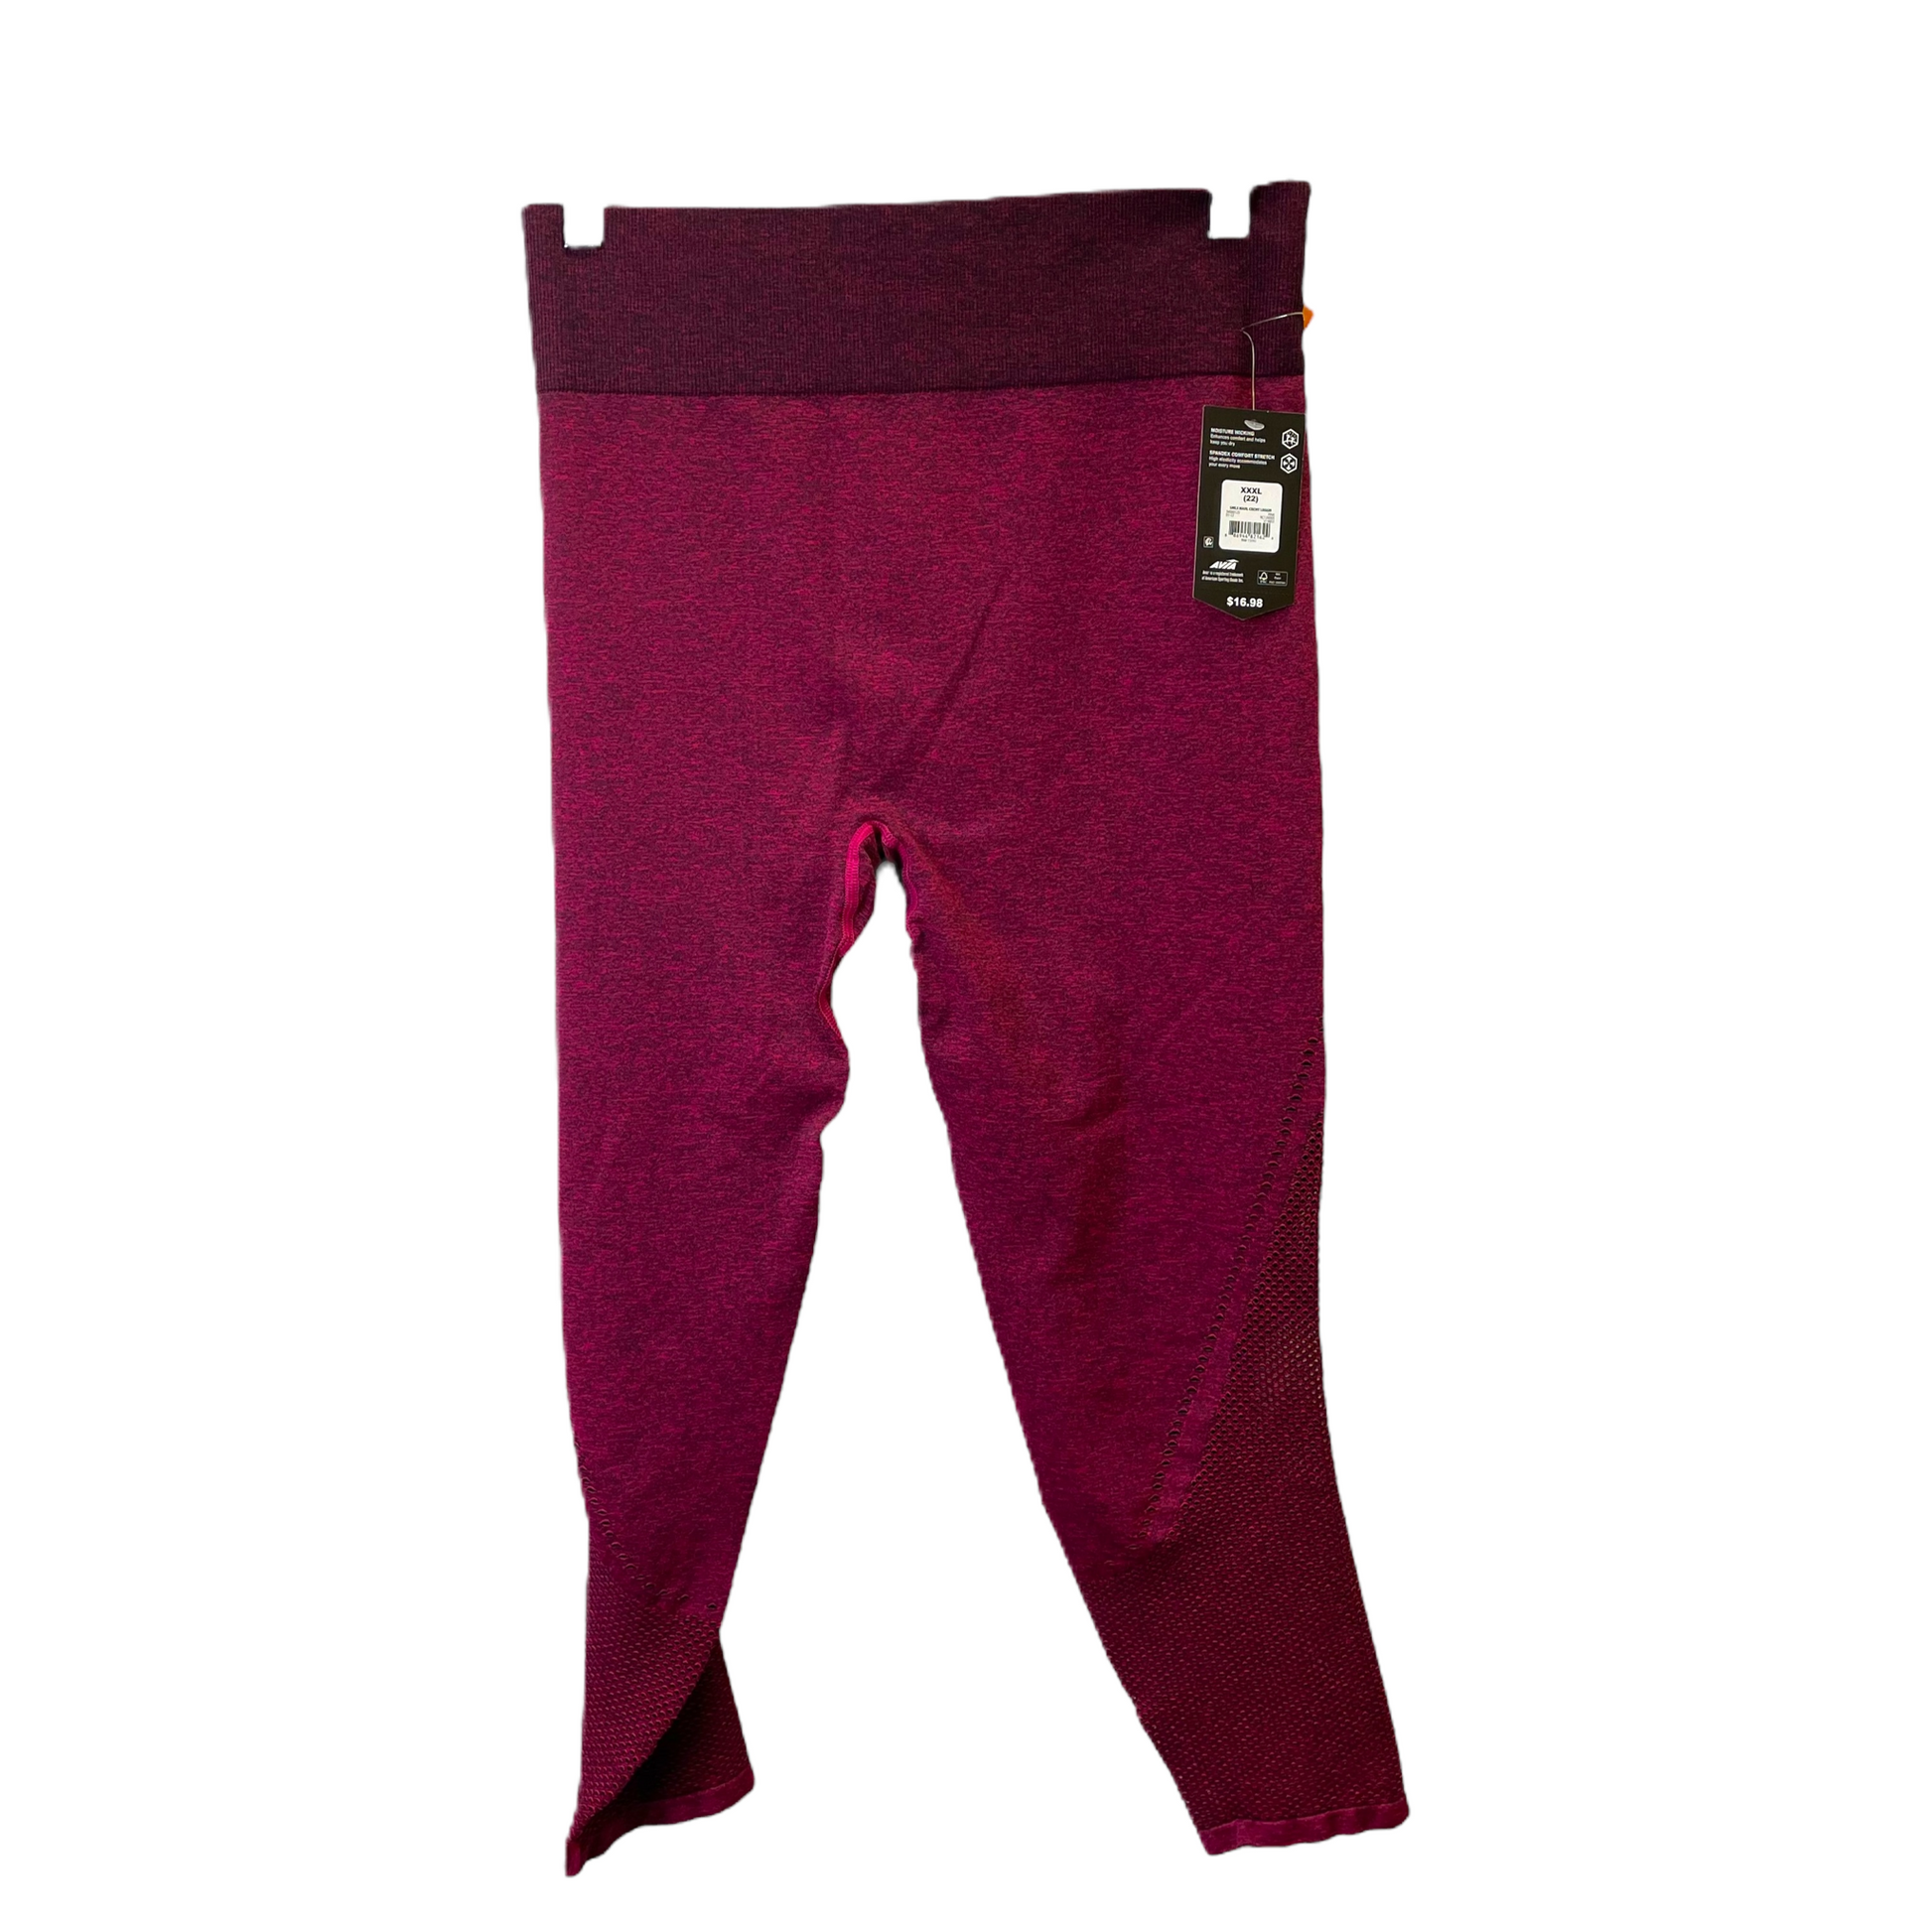 Athletic Pants By Avia Size: 2x – Clothes Mentor